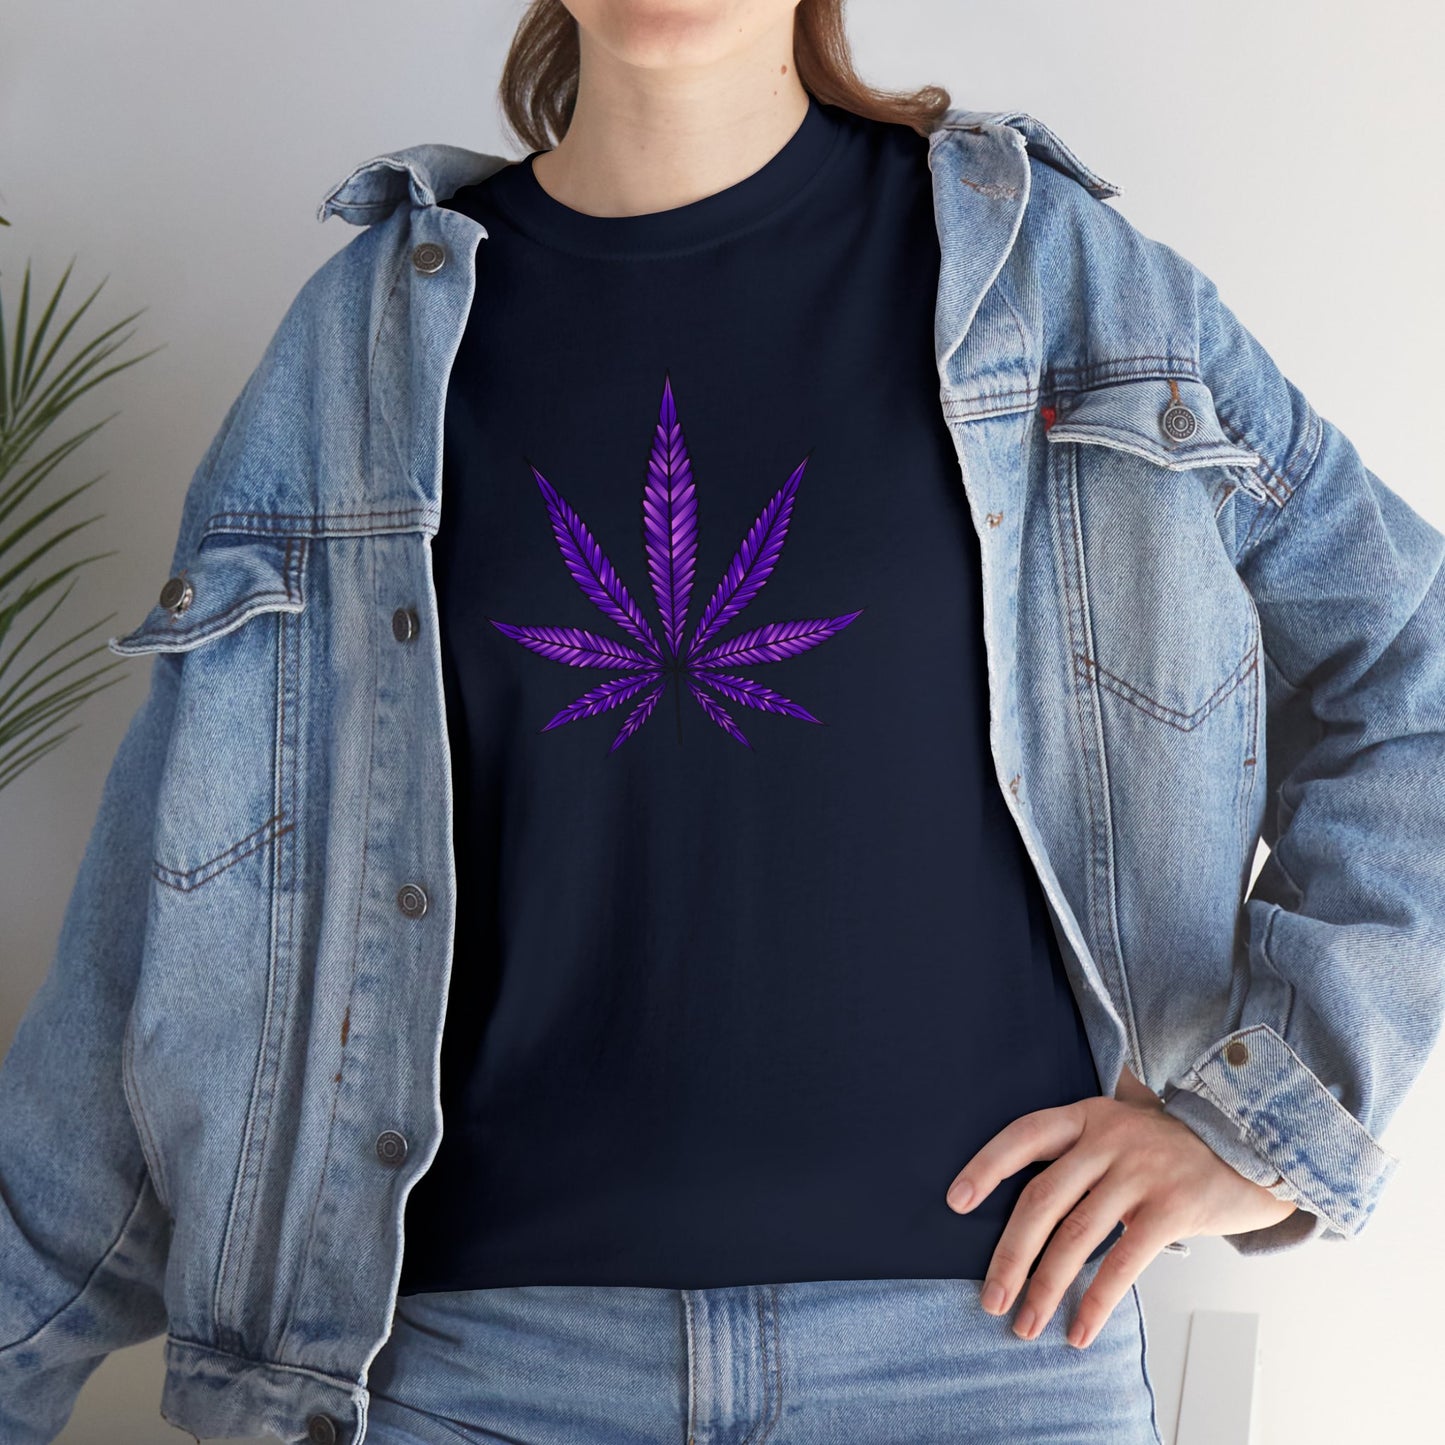 Sentence with Product Name: A person wearing a vibrant color Ganja Leaf Tee, layered with a light blue denim jacket, standing against an indoor background.